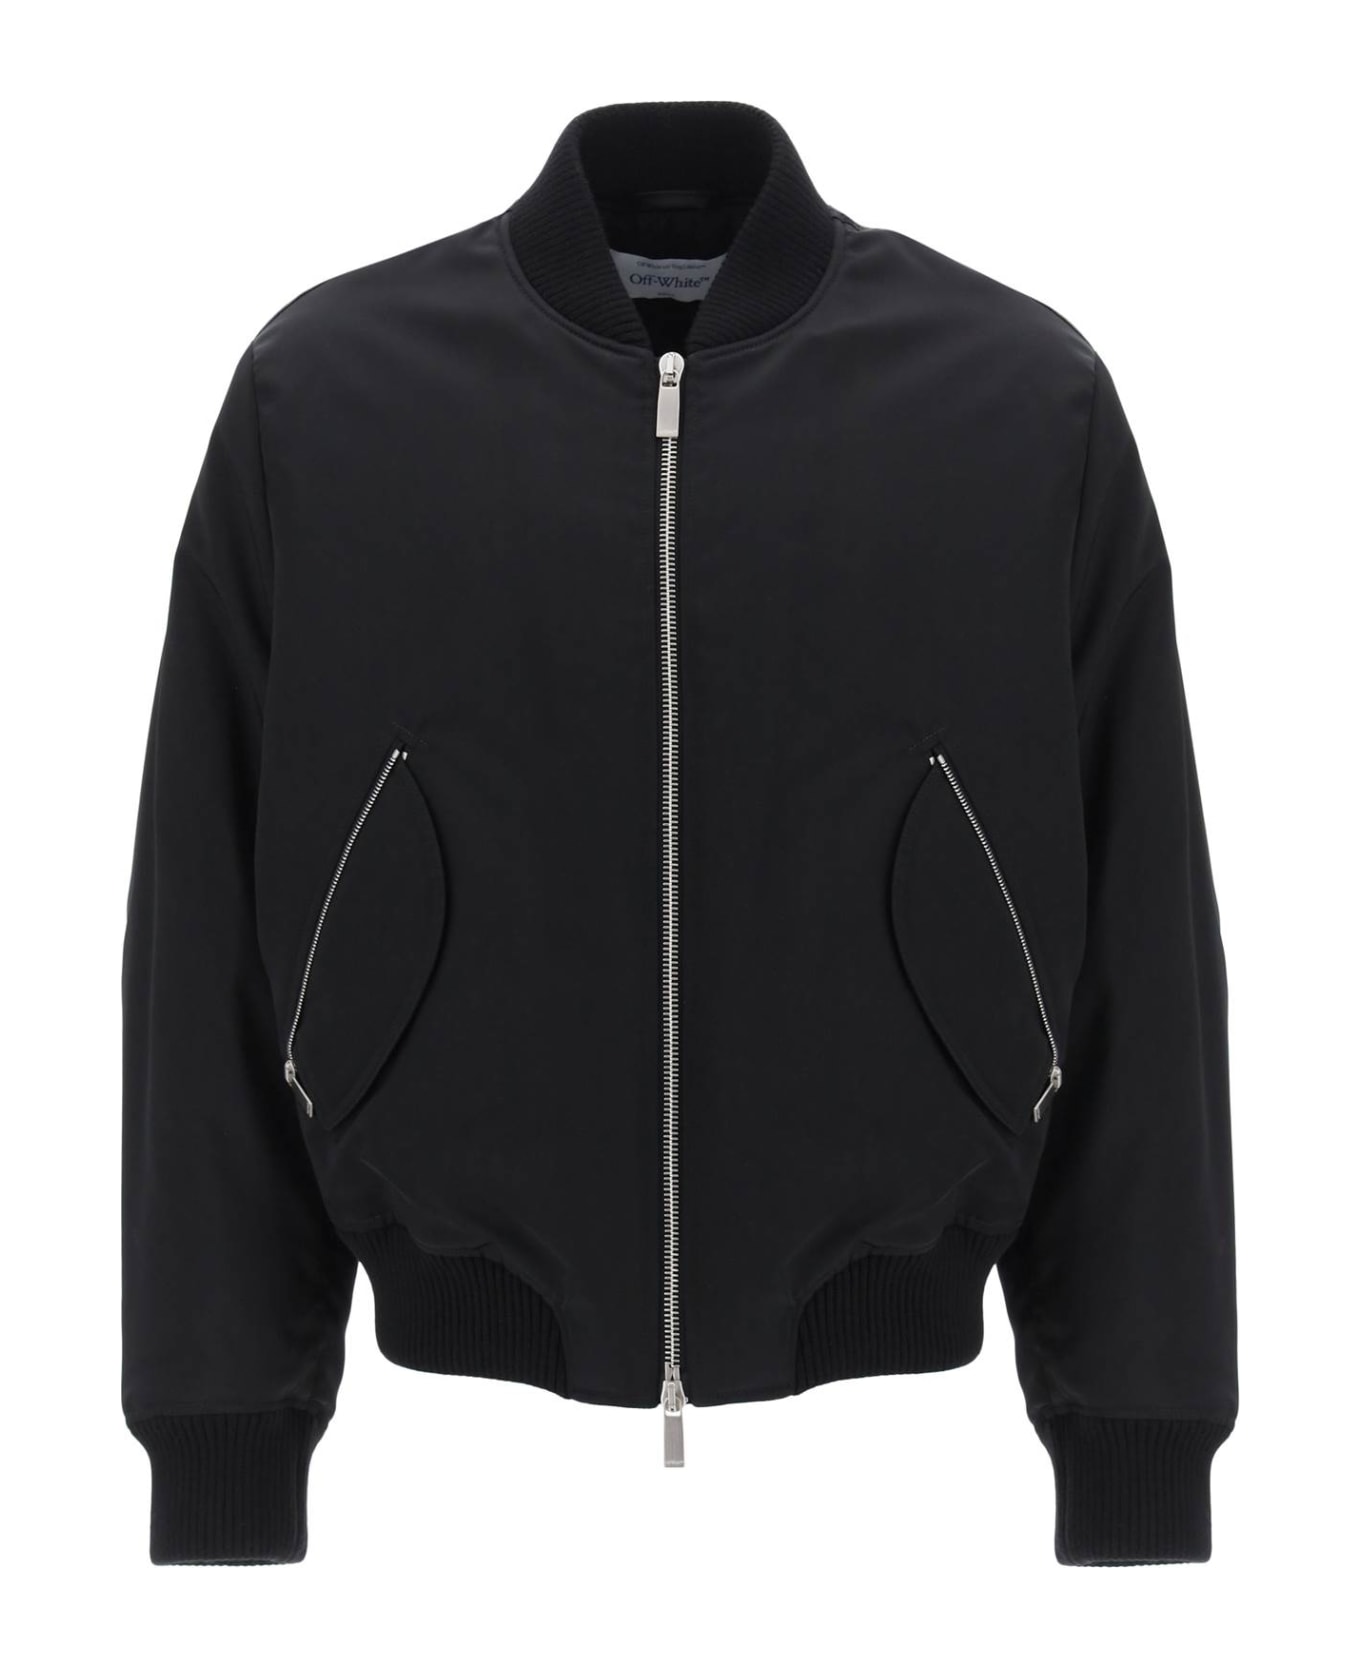 Off-White Arrow Embroidered Bomber - Black